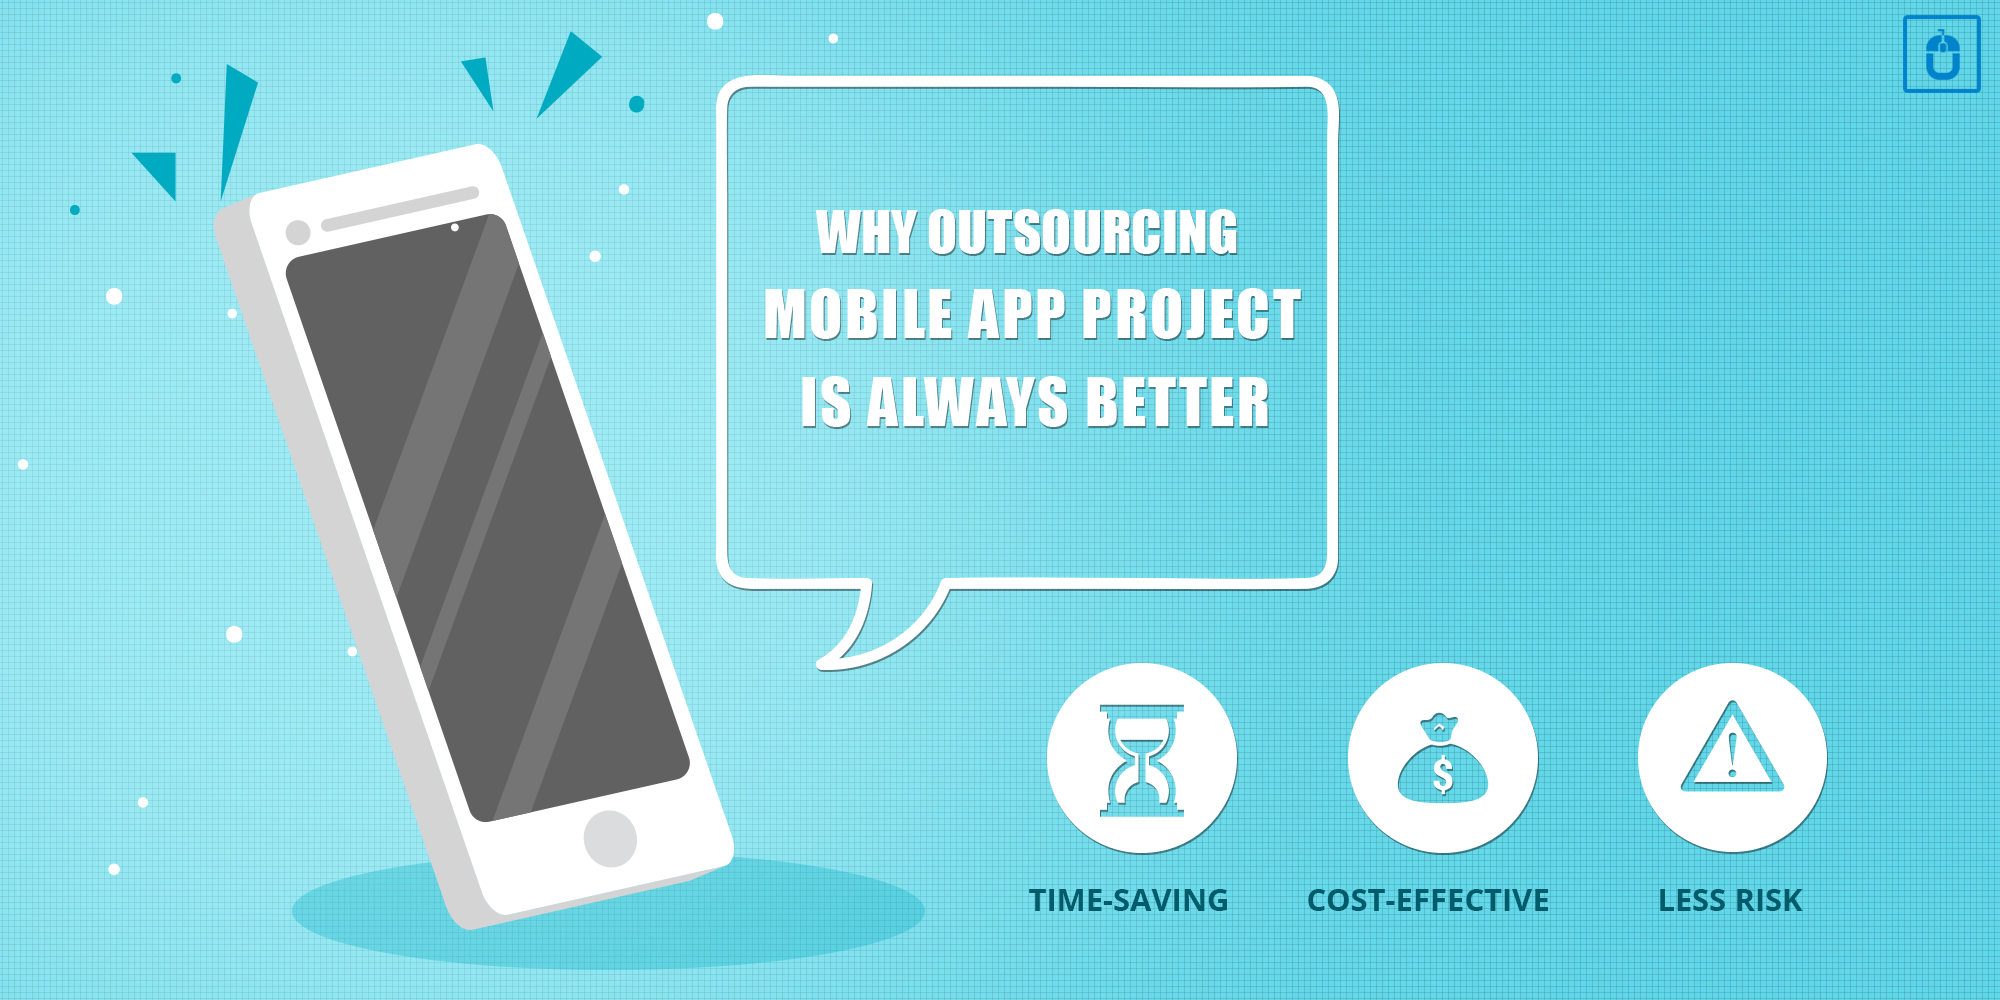 WHY OUTSOURCING MOBILE APP PROJECT IS ALWAYS BETTER